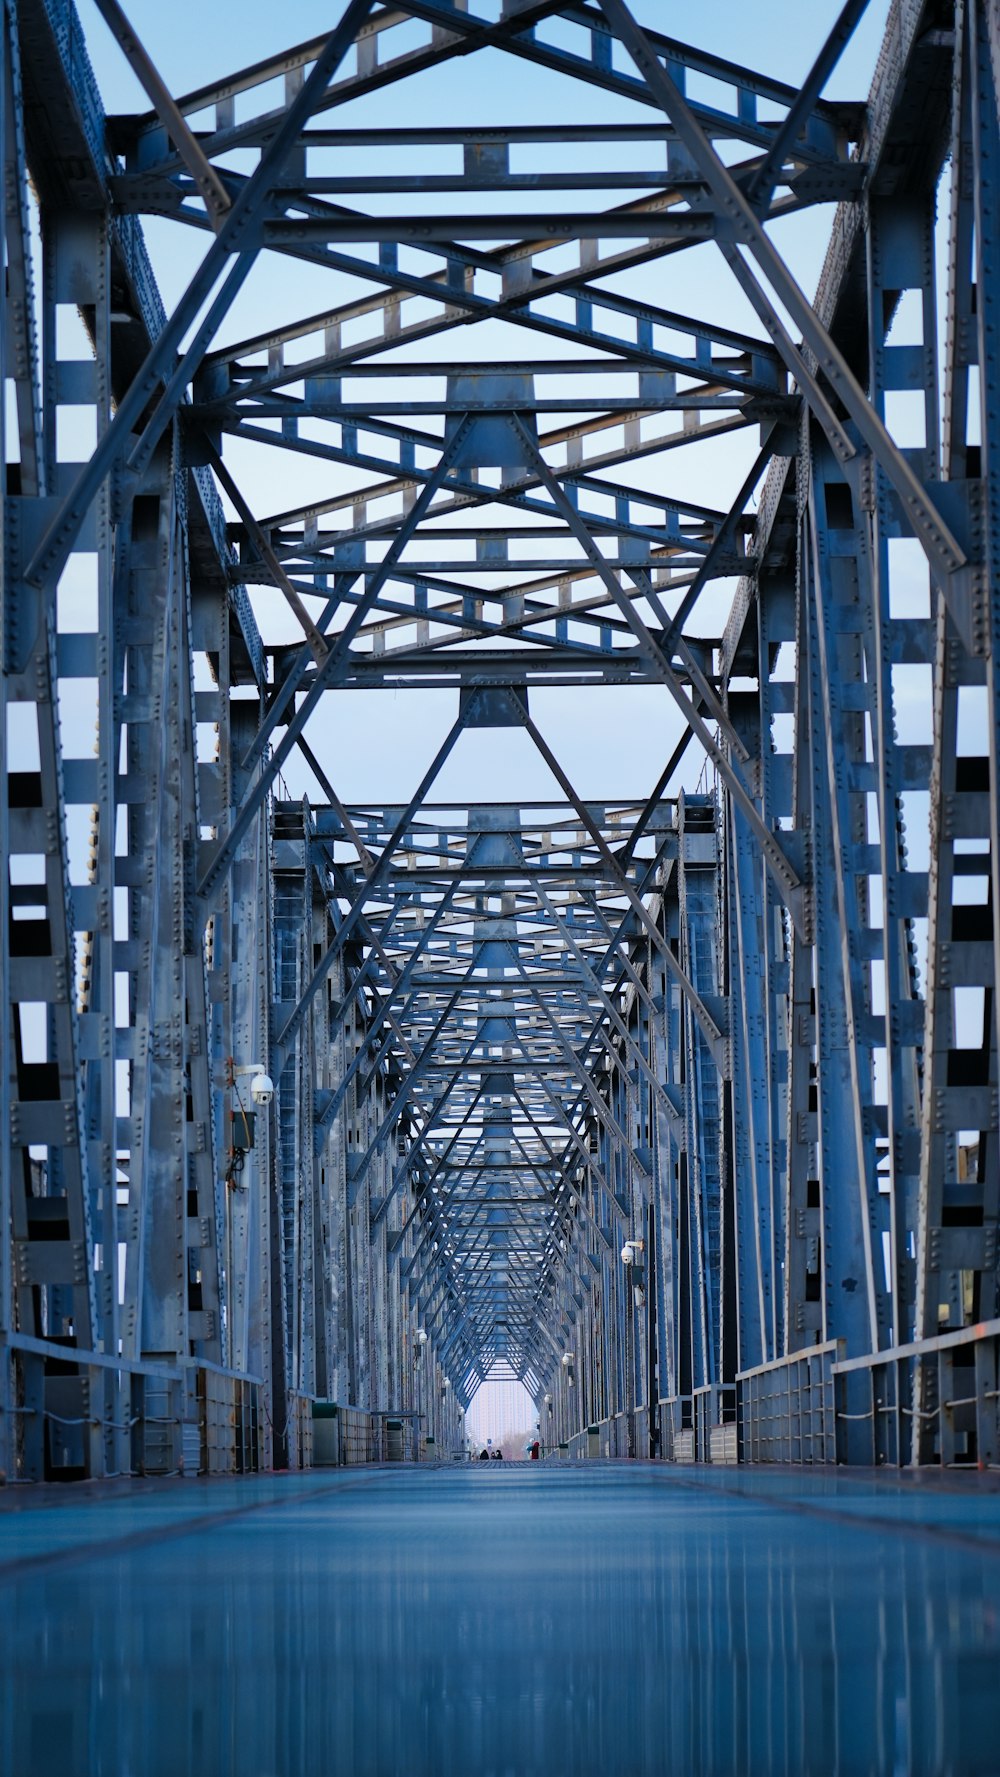 a large metal bridge spanning over a body of water